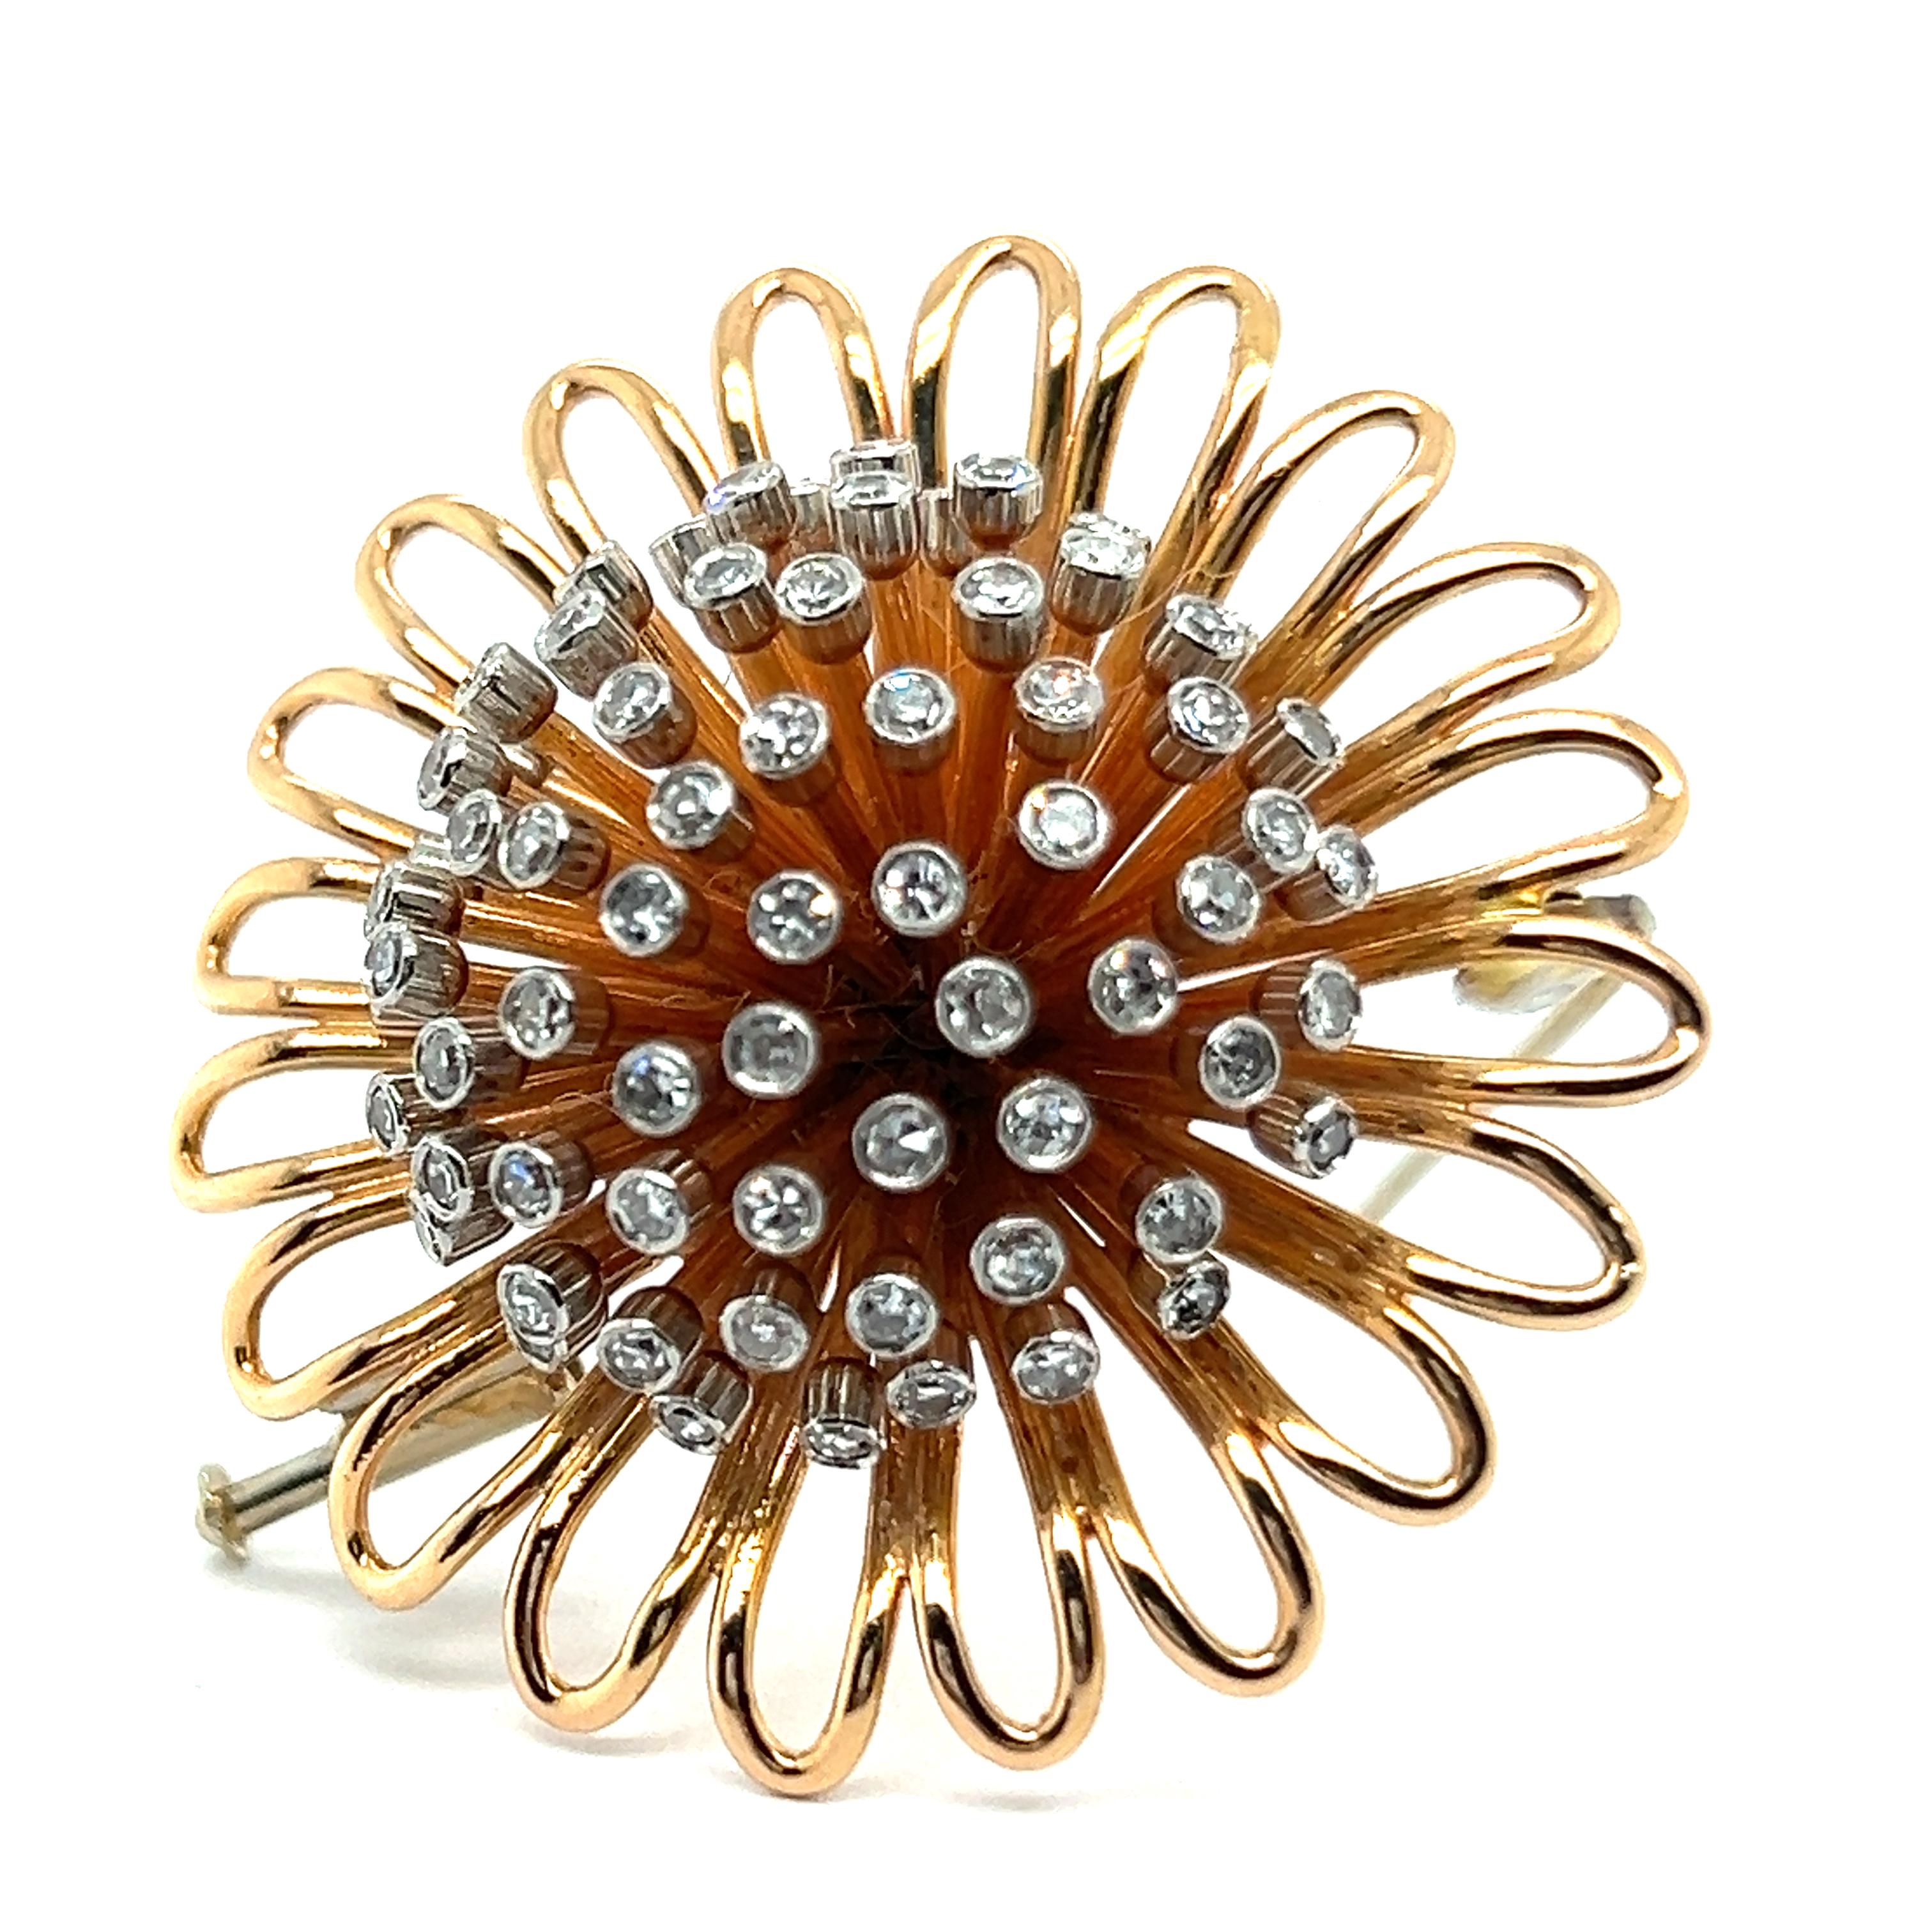 Presenting a striking brooch by the visionary Swiss jeweler Meinrad Burch-Korrodi. Crafted in 18 Karat red and white gold, it features 70 diamonds with an 8/8 cut, totaling 1.80 carats. 

Burch-Korrodi's innovative approach transforms the